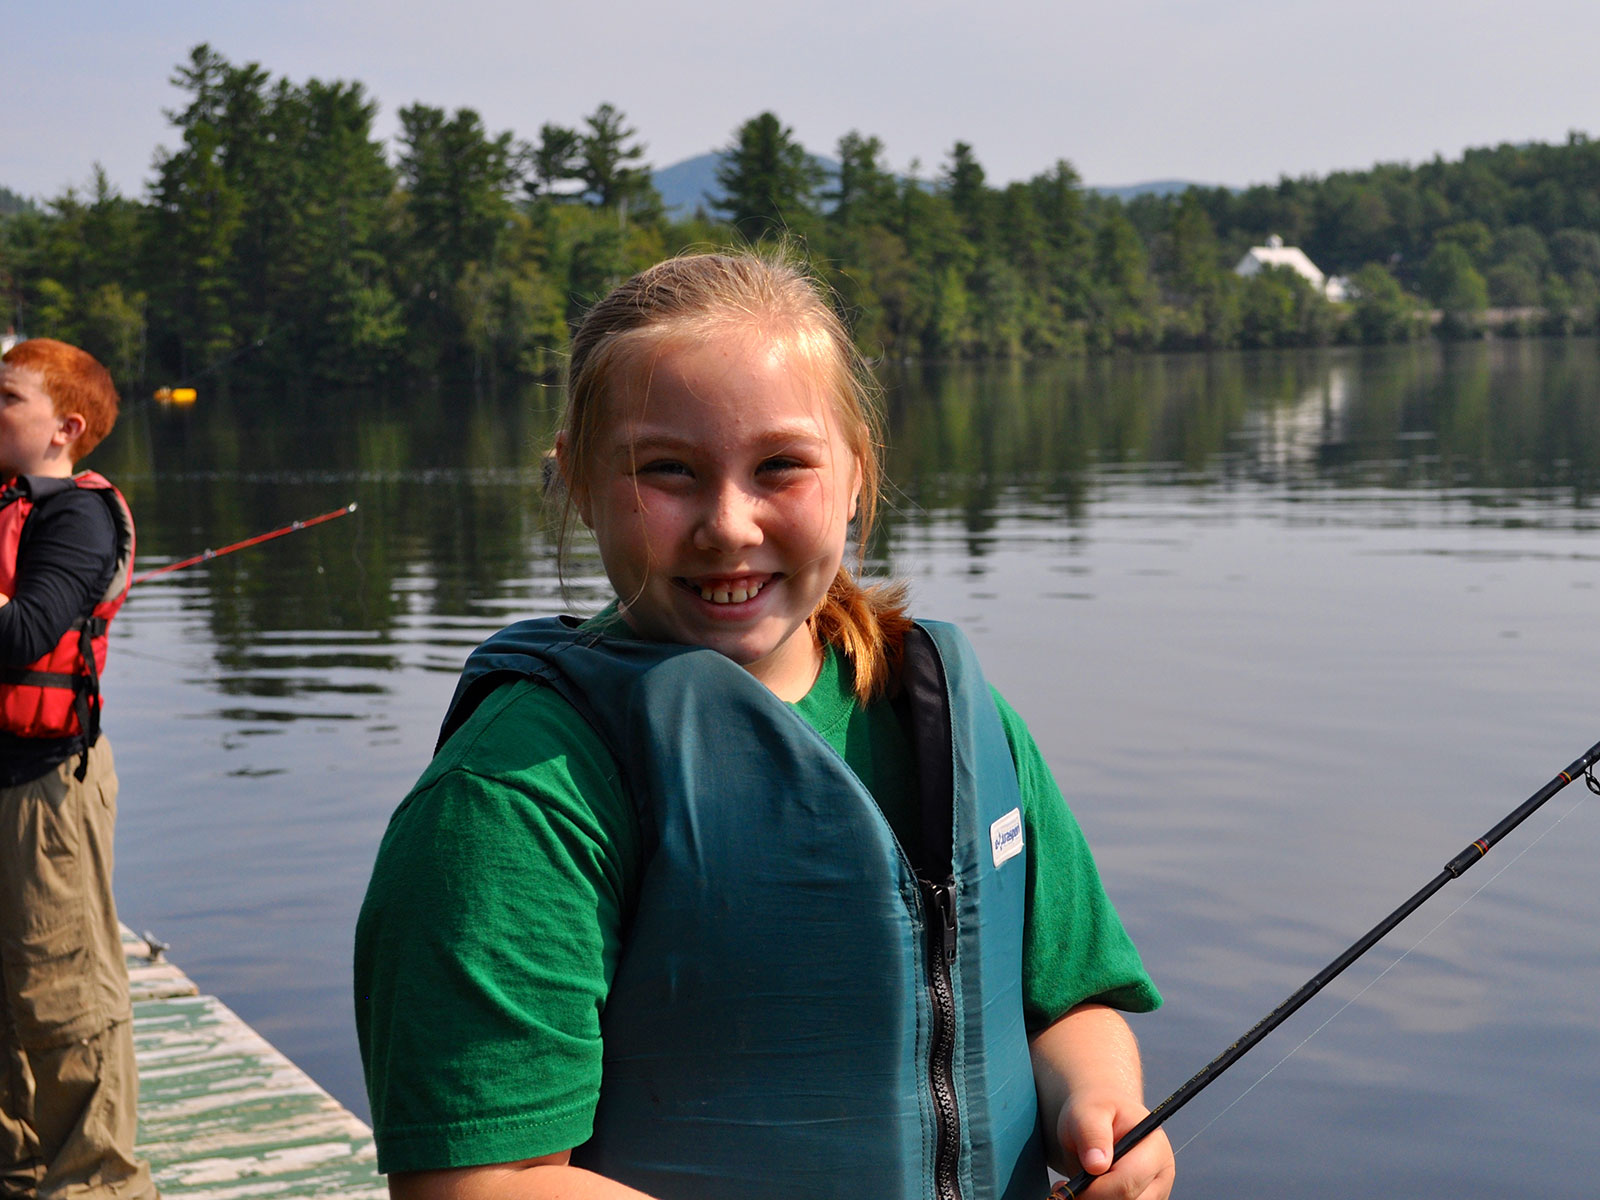 Fishing Camp (ages 10-13) - University of Maine 4-H Camp & Learning Center  at Bryant Pond - University of Maine Cooperative Extension